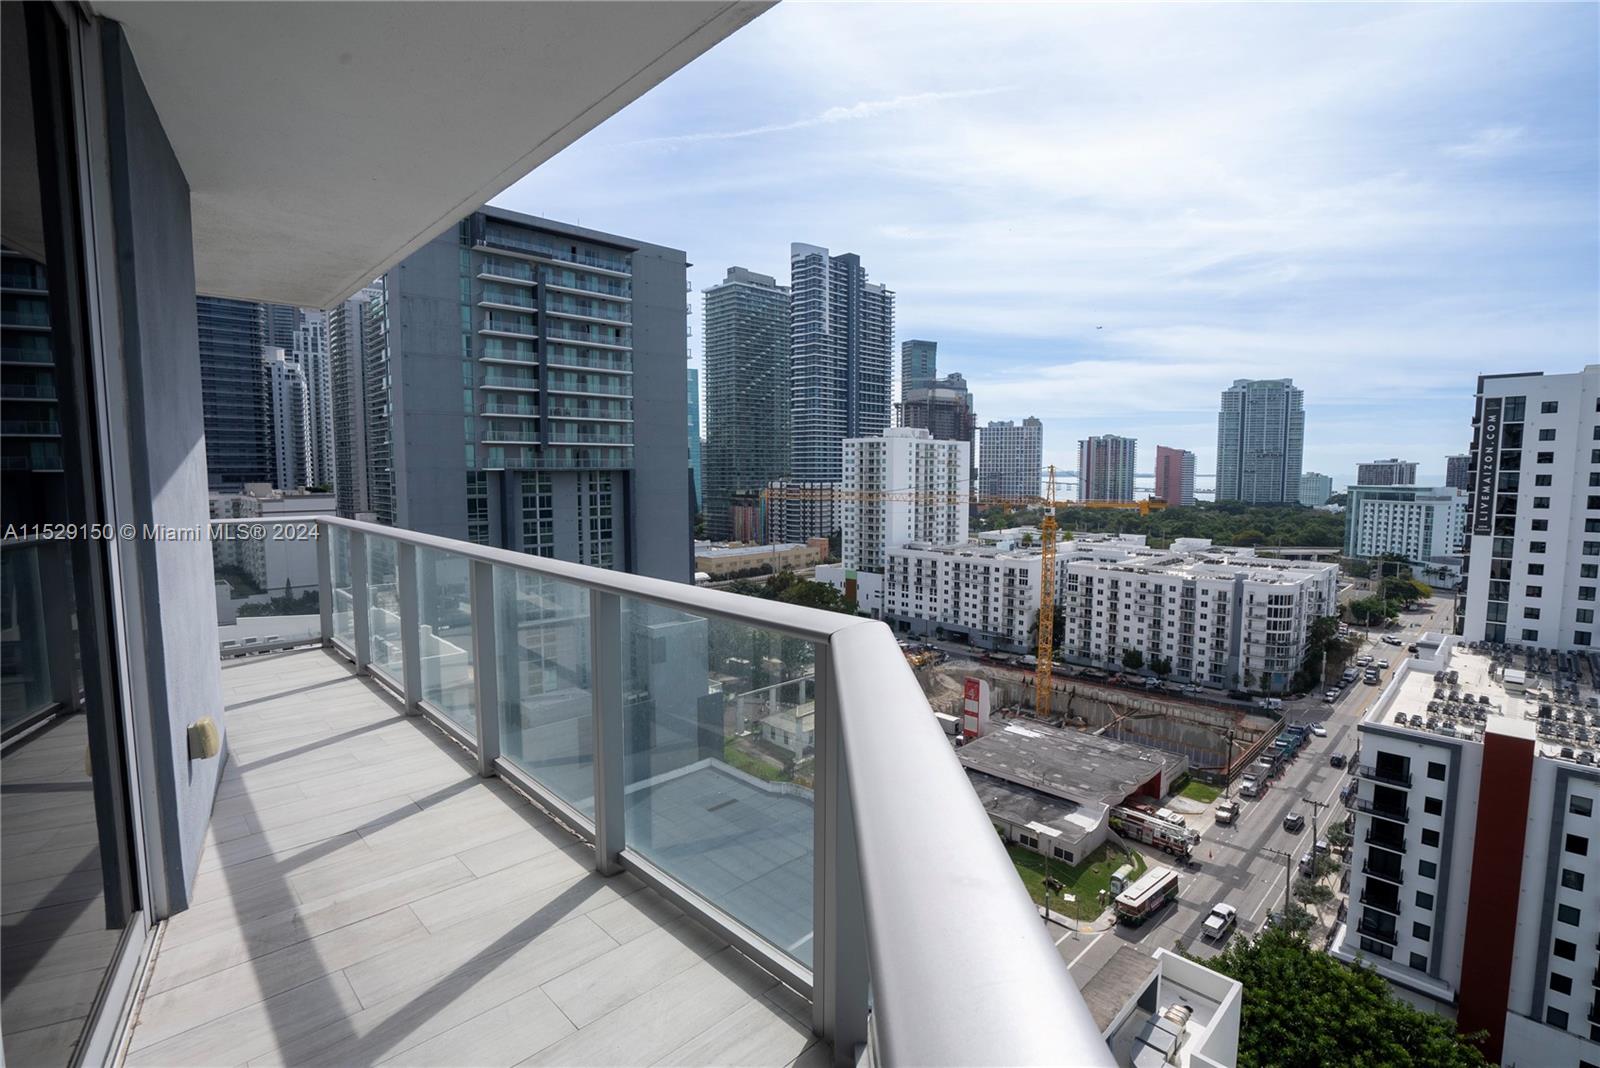 Presenting an unparalleled opportunity to acquire a sophisticated 3-bedroom, 3-bathroom unit in the heart of Miami's iconic Brickell district. This exclusive residence not only offers a spacious and contemporary living space but also treats you to breathtaking city views that redefine urban luxury. It has two parking spaces and two storages.
"Views that redefine urban luxury.
Marvel at the city's dynamic skyline from the comfort of your own home.